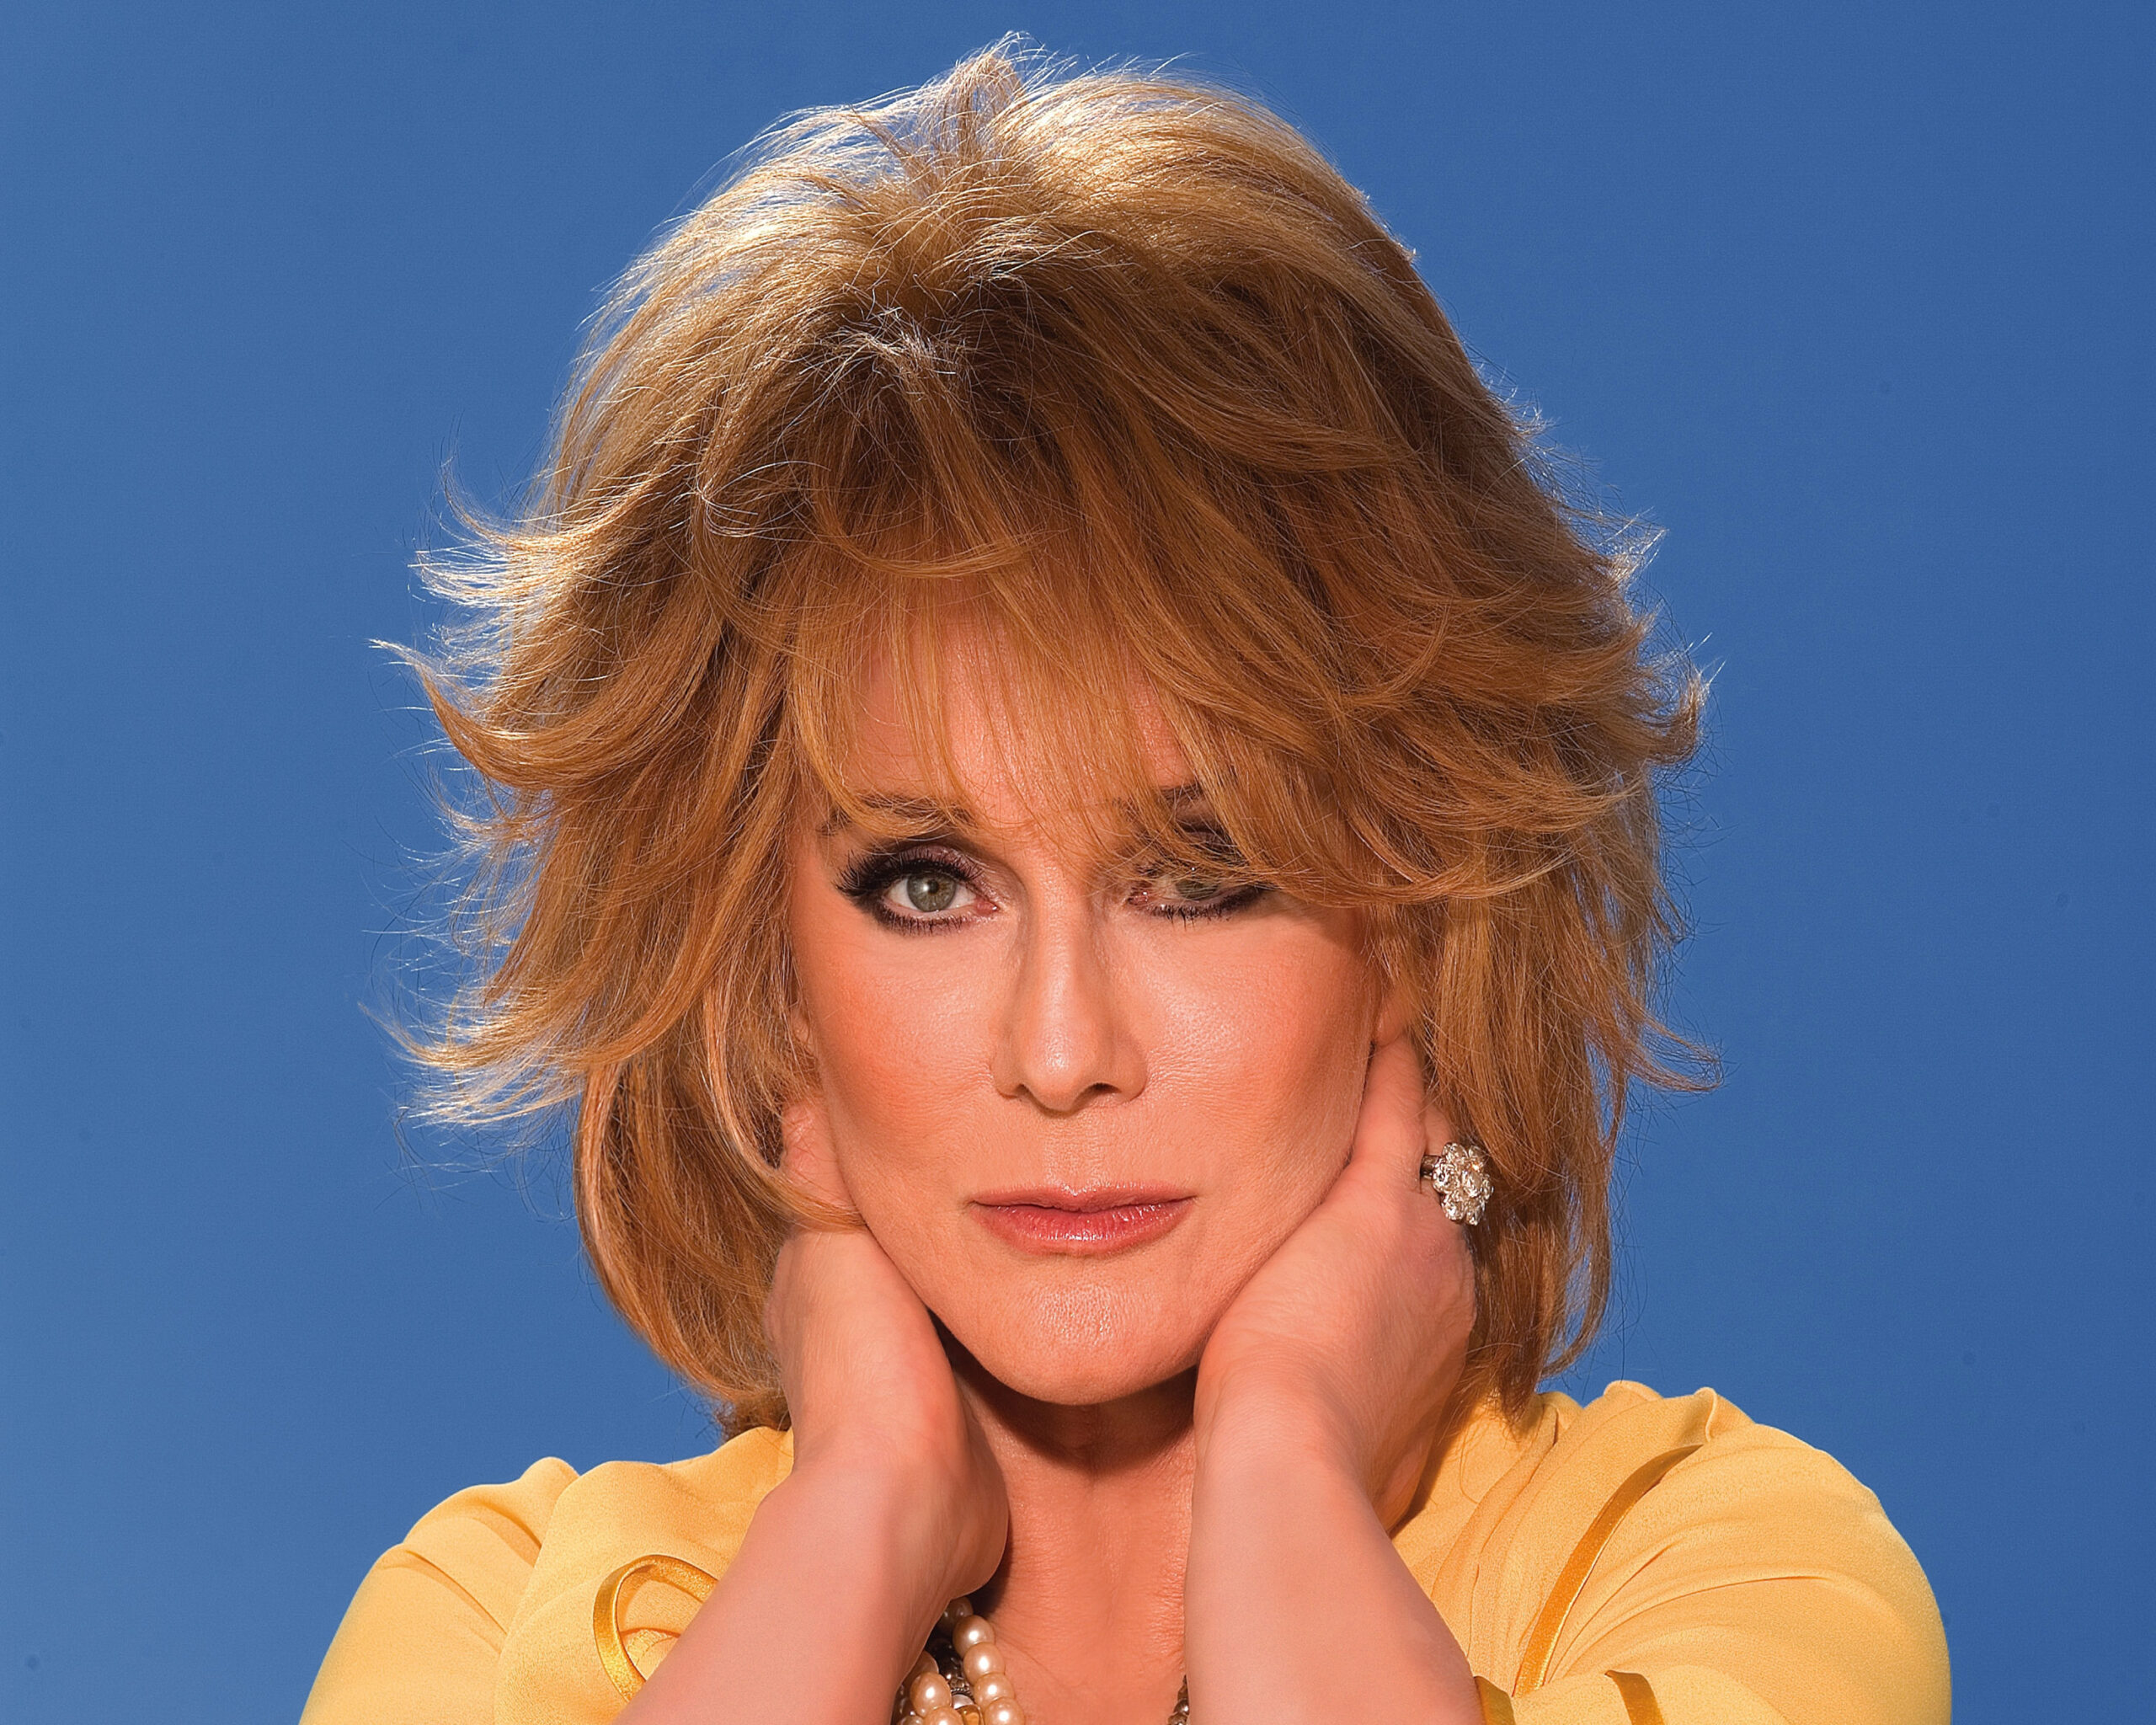 Ann-Margret Rocks With Pete Townshend, Joe Perry On New Album